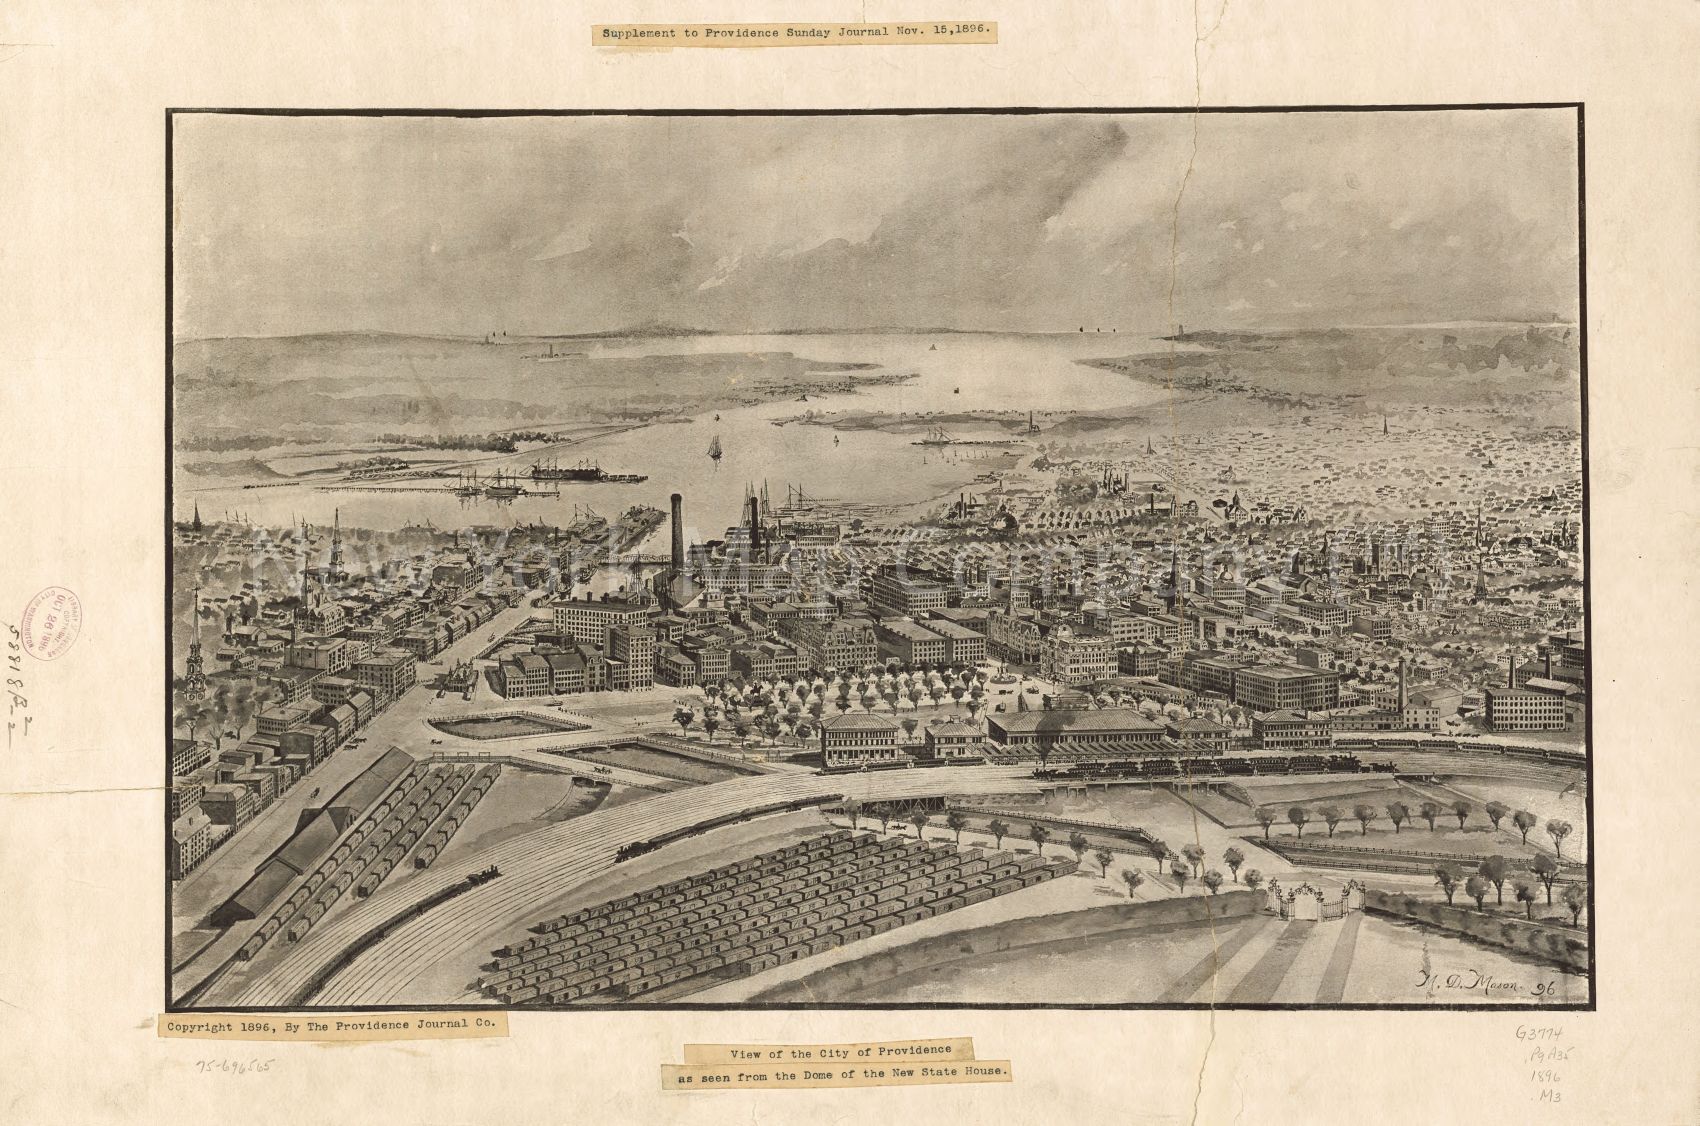 1896 map View of the city of Providence as seen from the dome of the new State House. Supplement to Providence Sunday journal, Nov. 15, 1896. Map Subjects: Providence | Providence RI | Rhode Island |